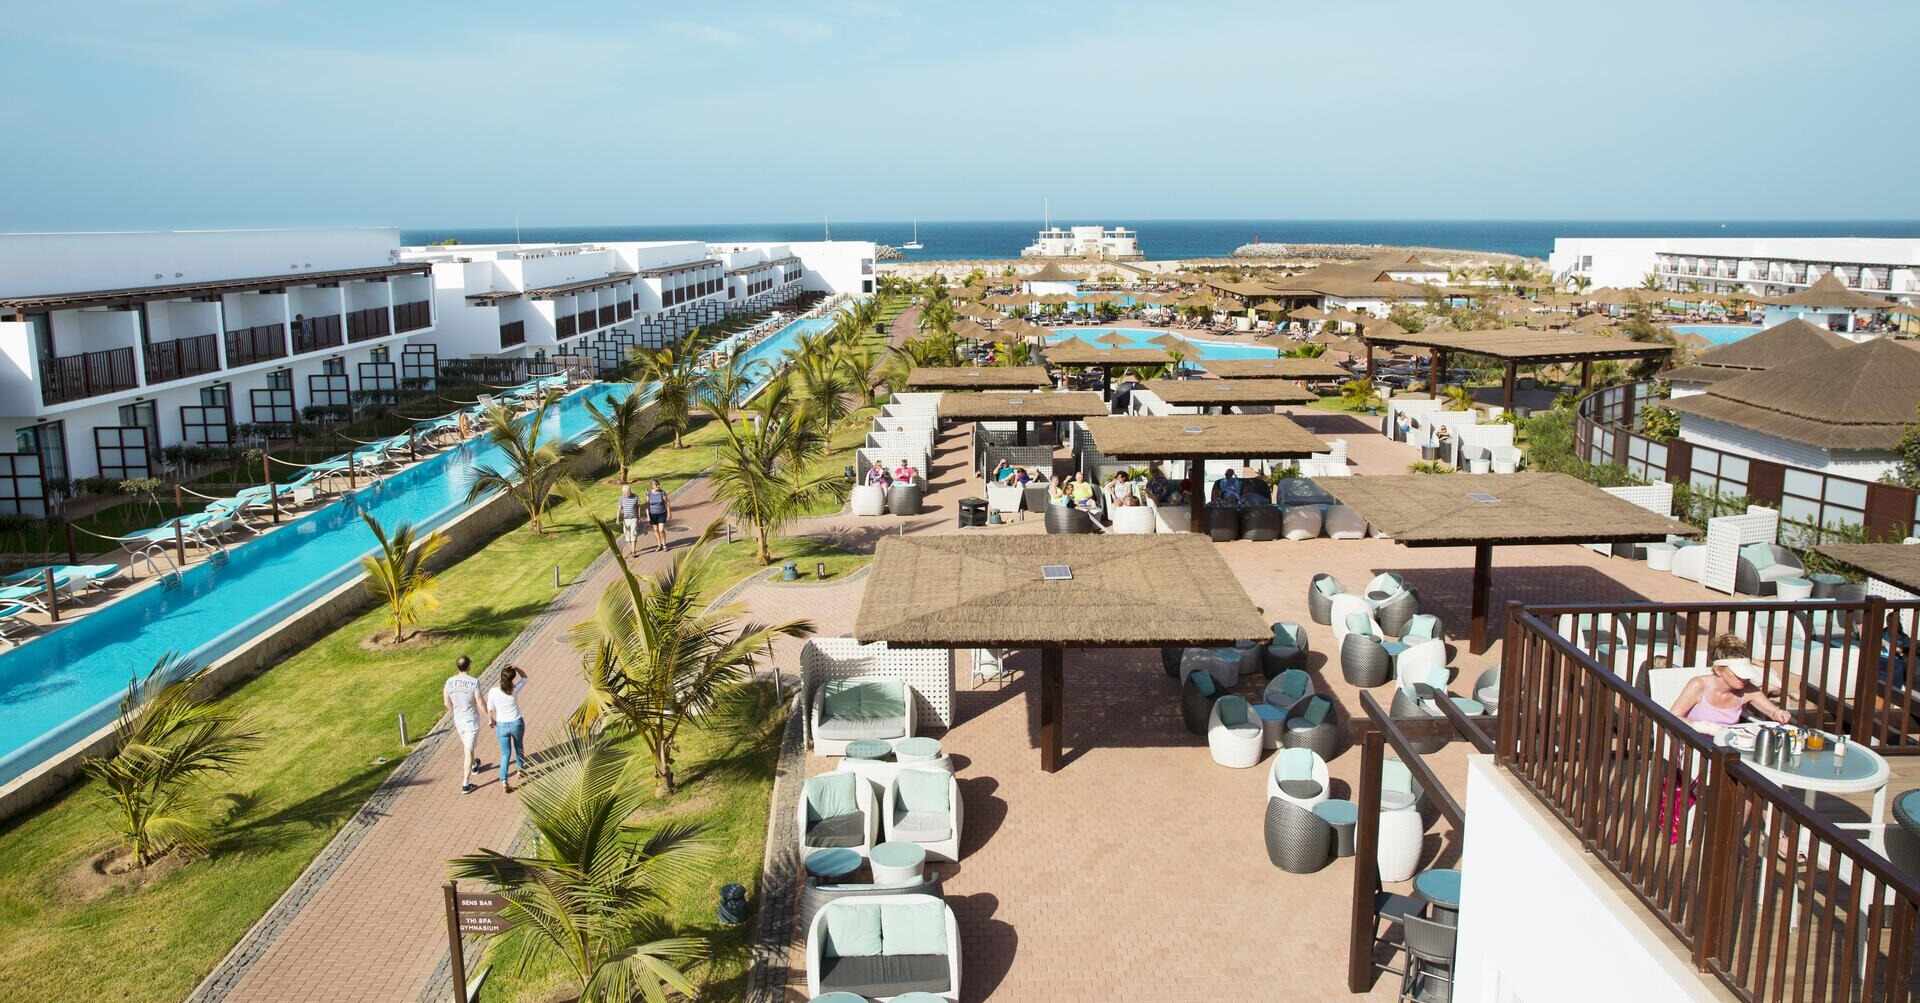 Holidays to Cape Verde Book your holiday now! TUI BLUE